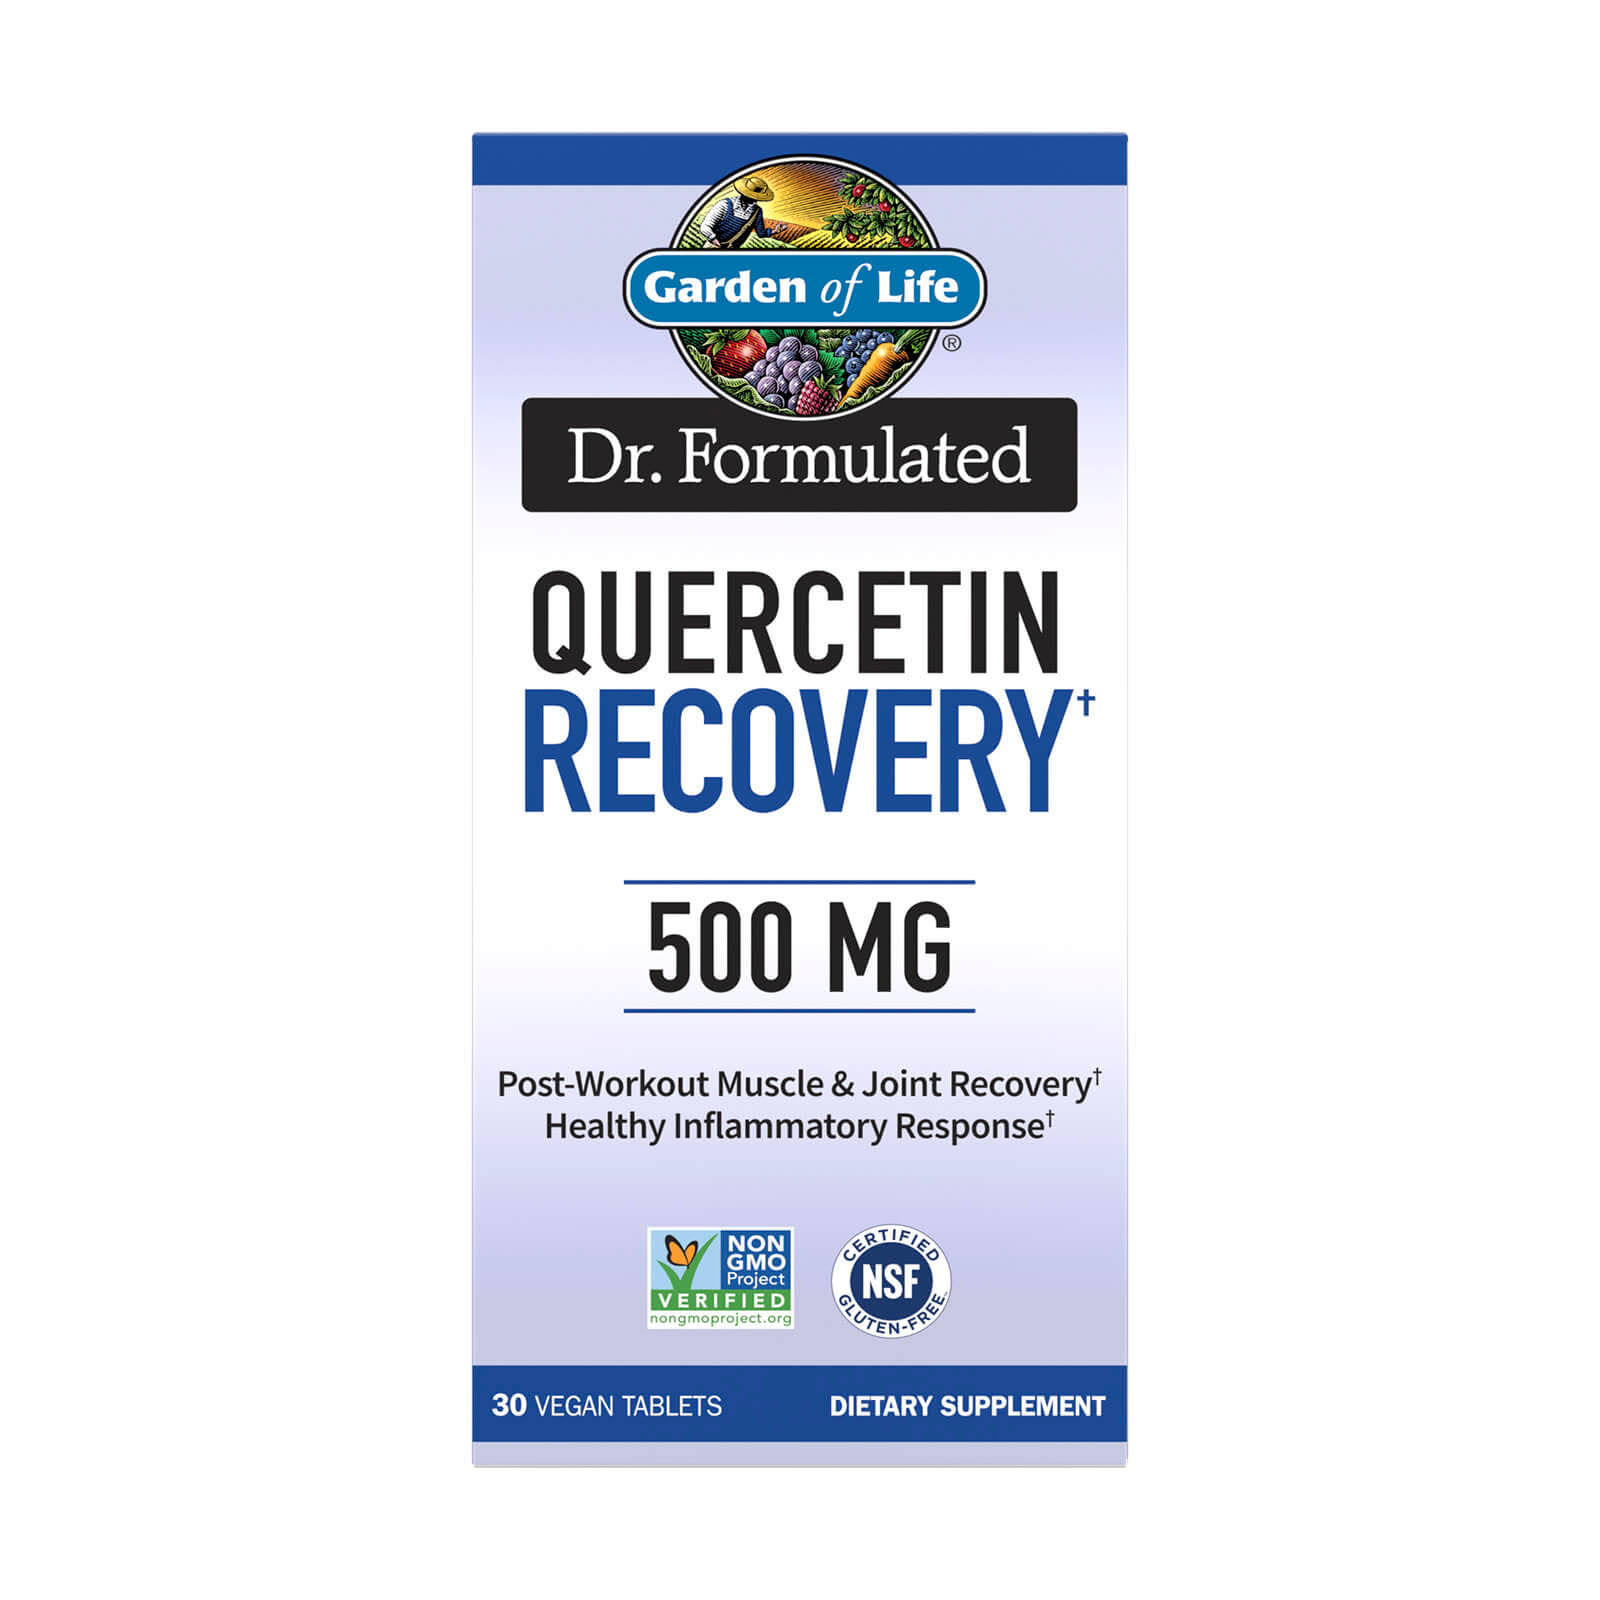 Garden of Life Dr. Formulated Quercetin Recovery - 30 Vegan Tablets